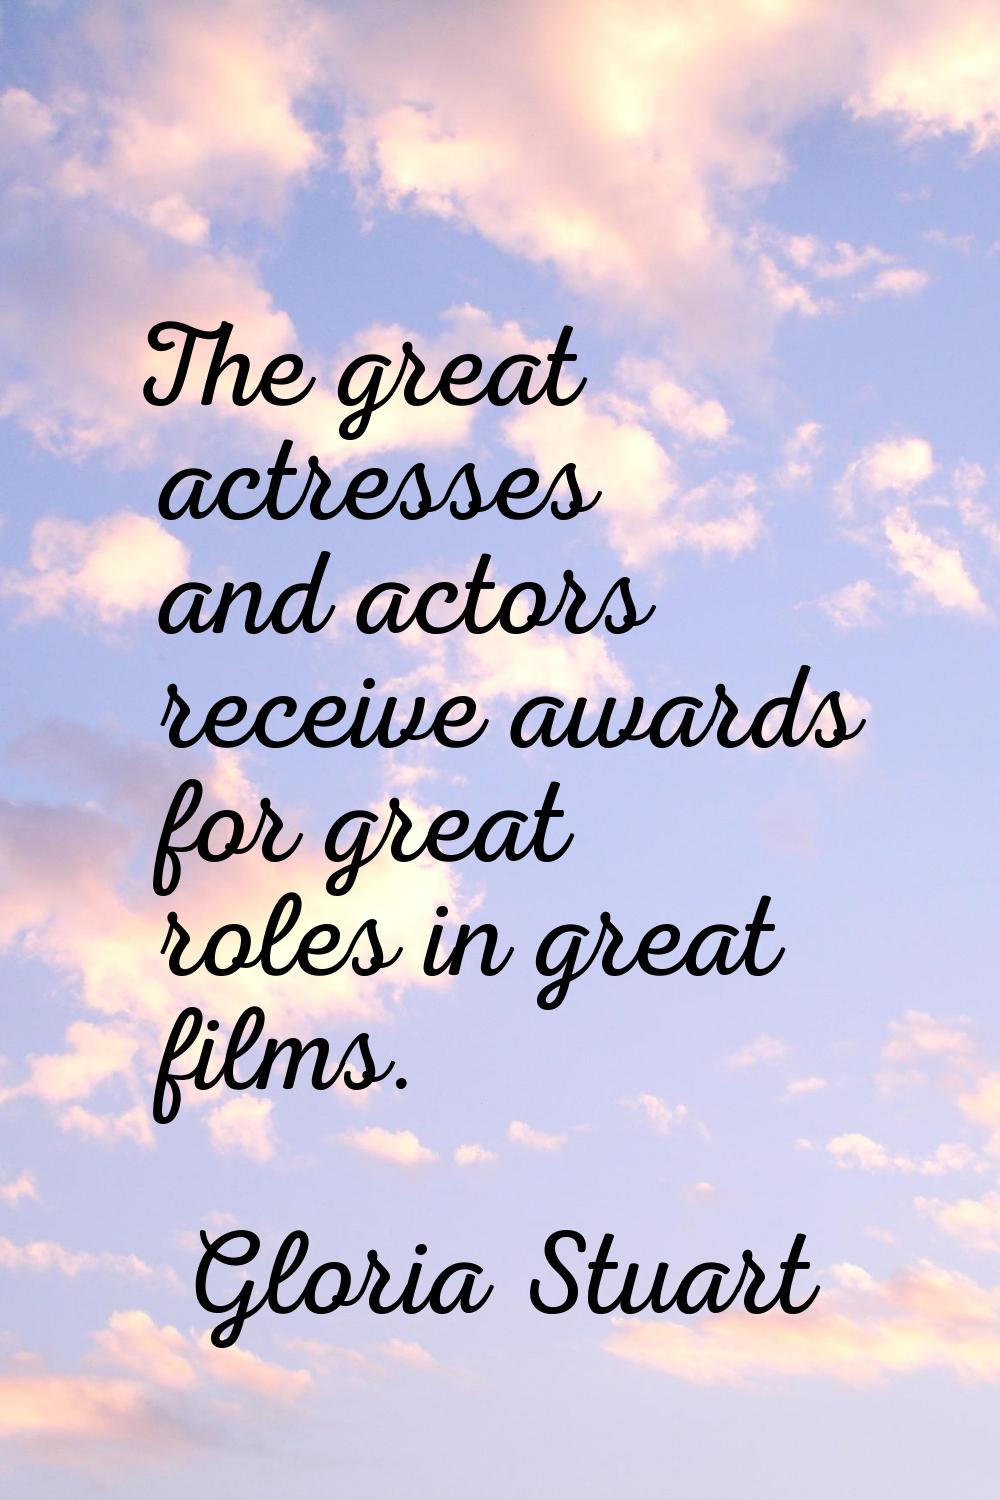 The great actresses and actors receive awards for great roles in great films.